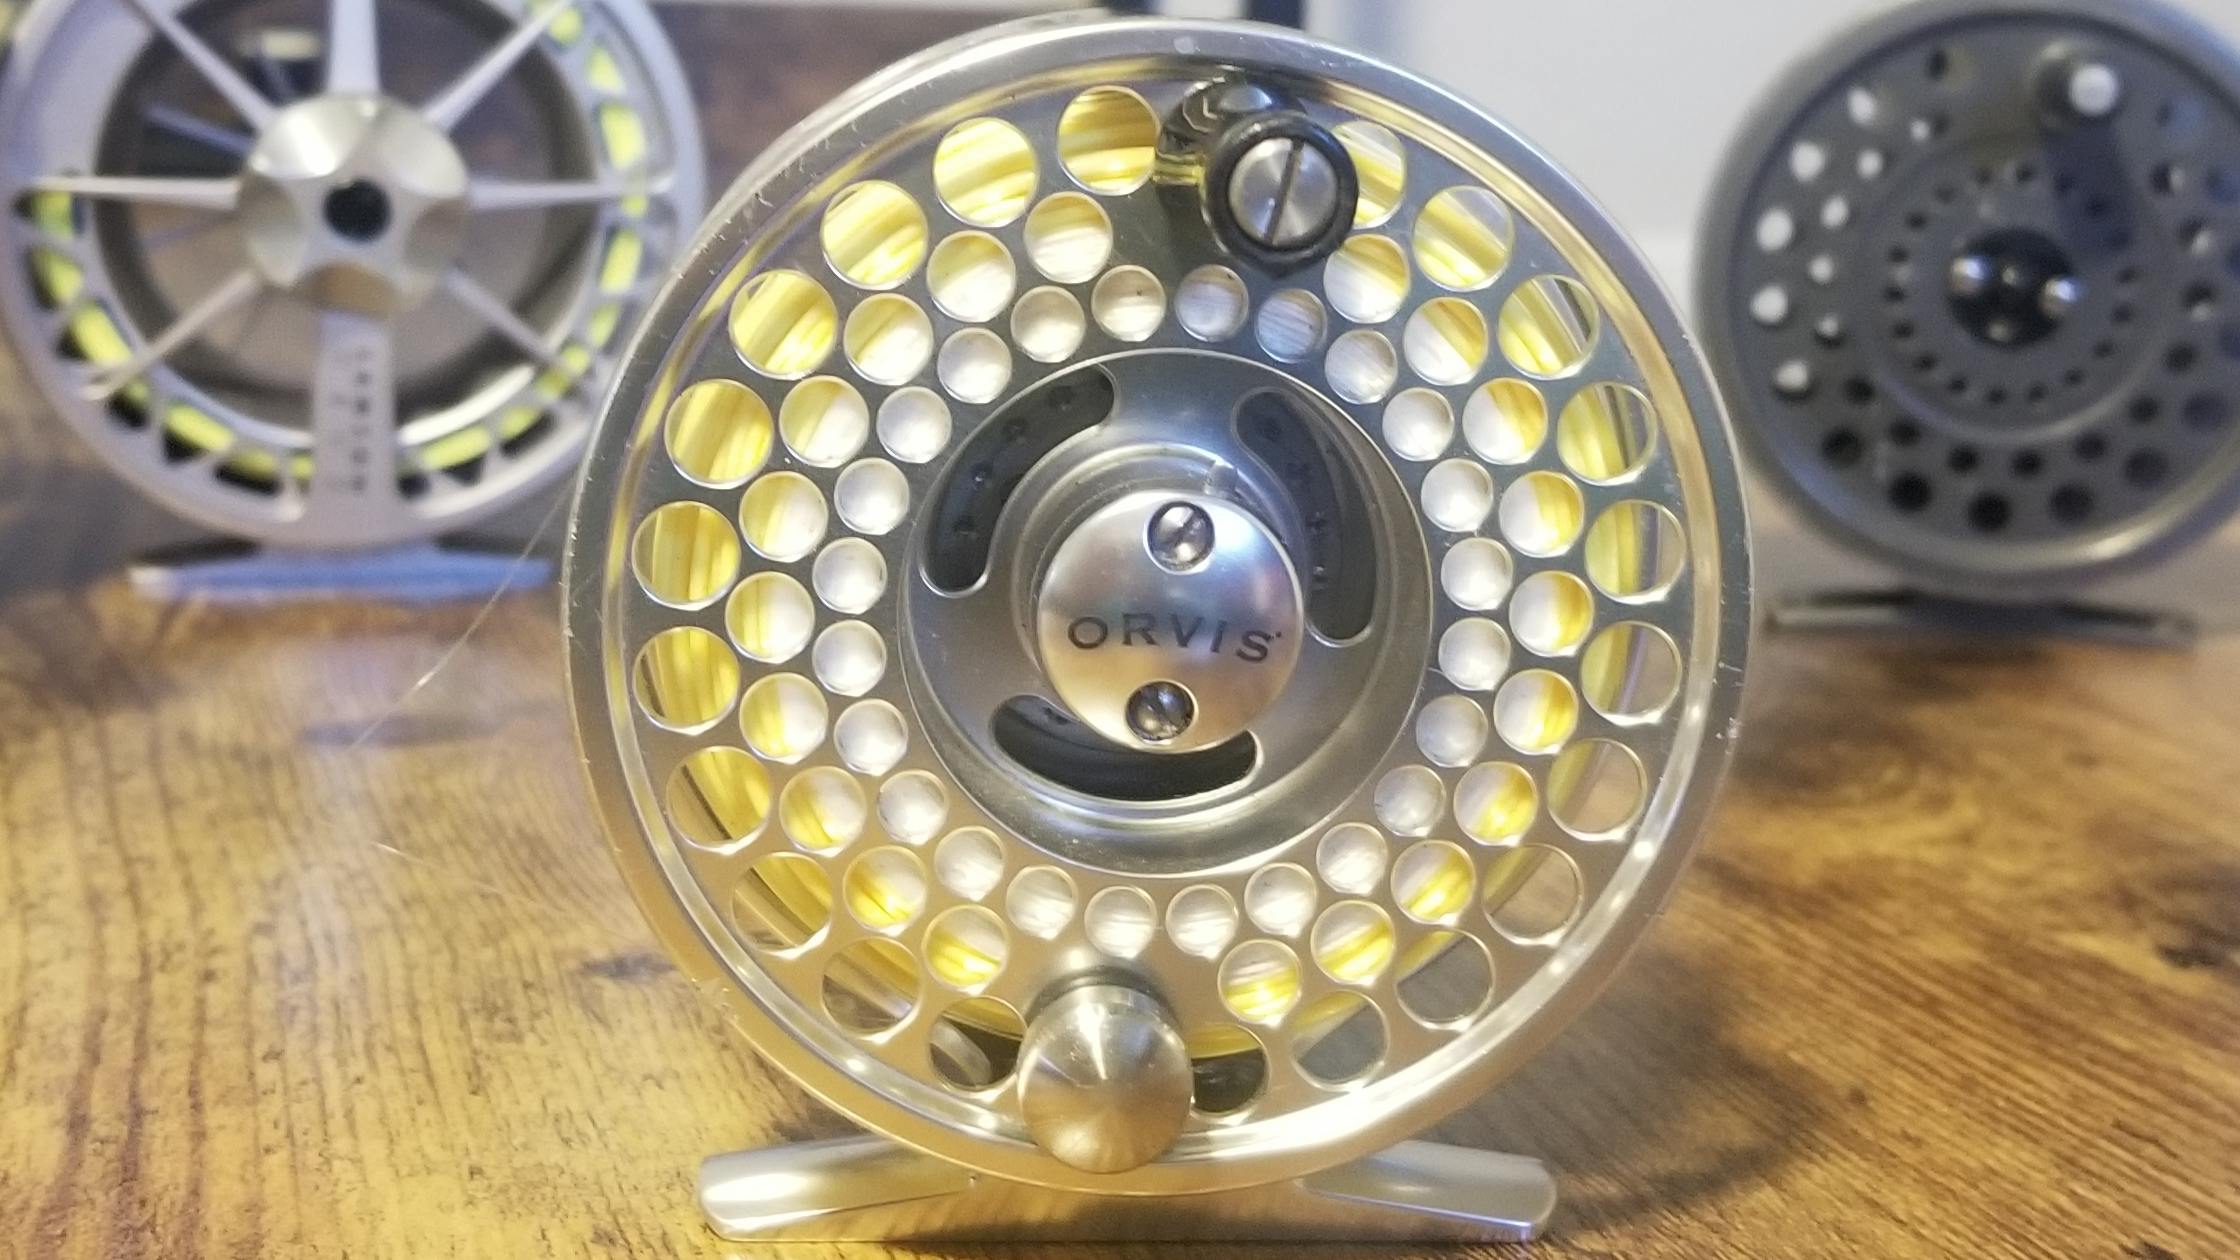 Three fly reels on a wooden table